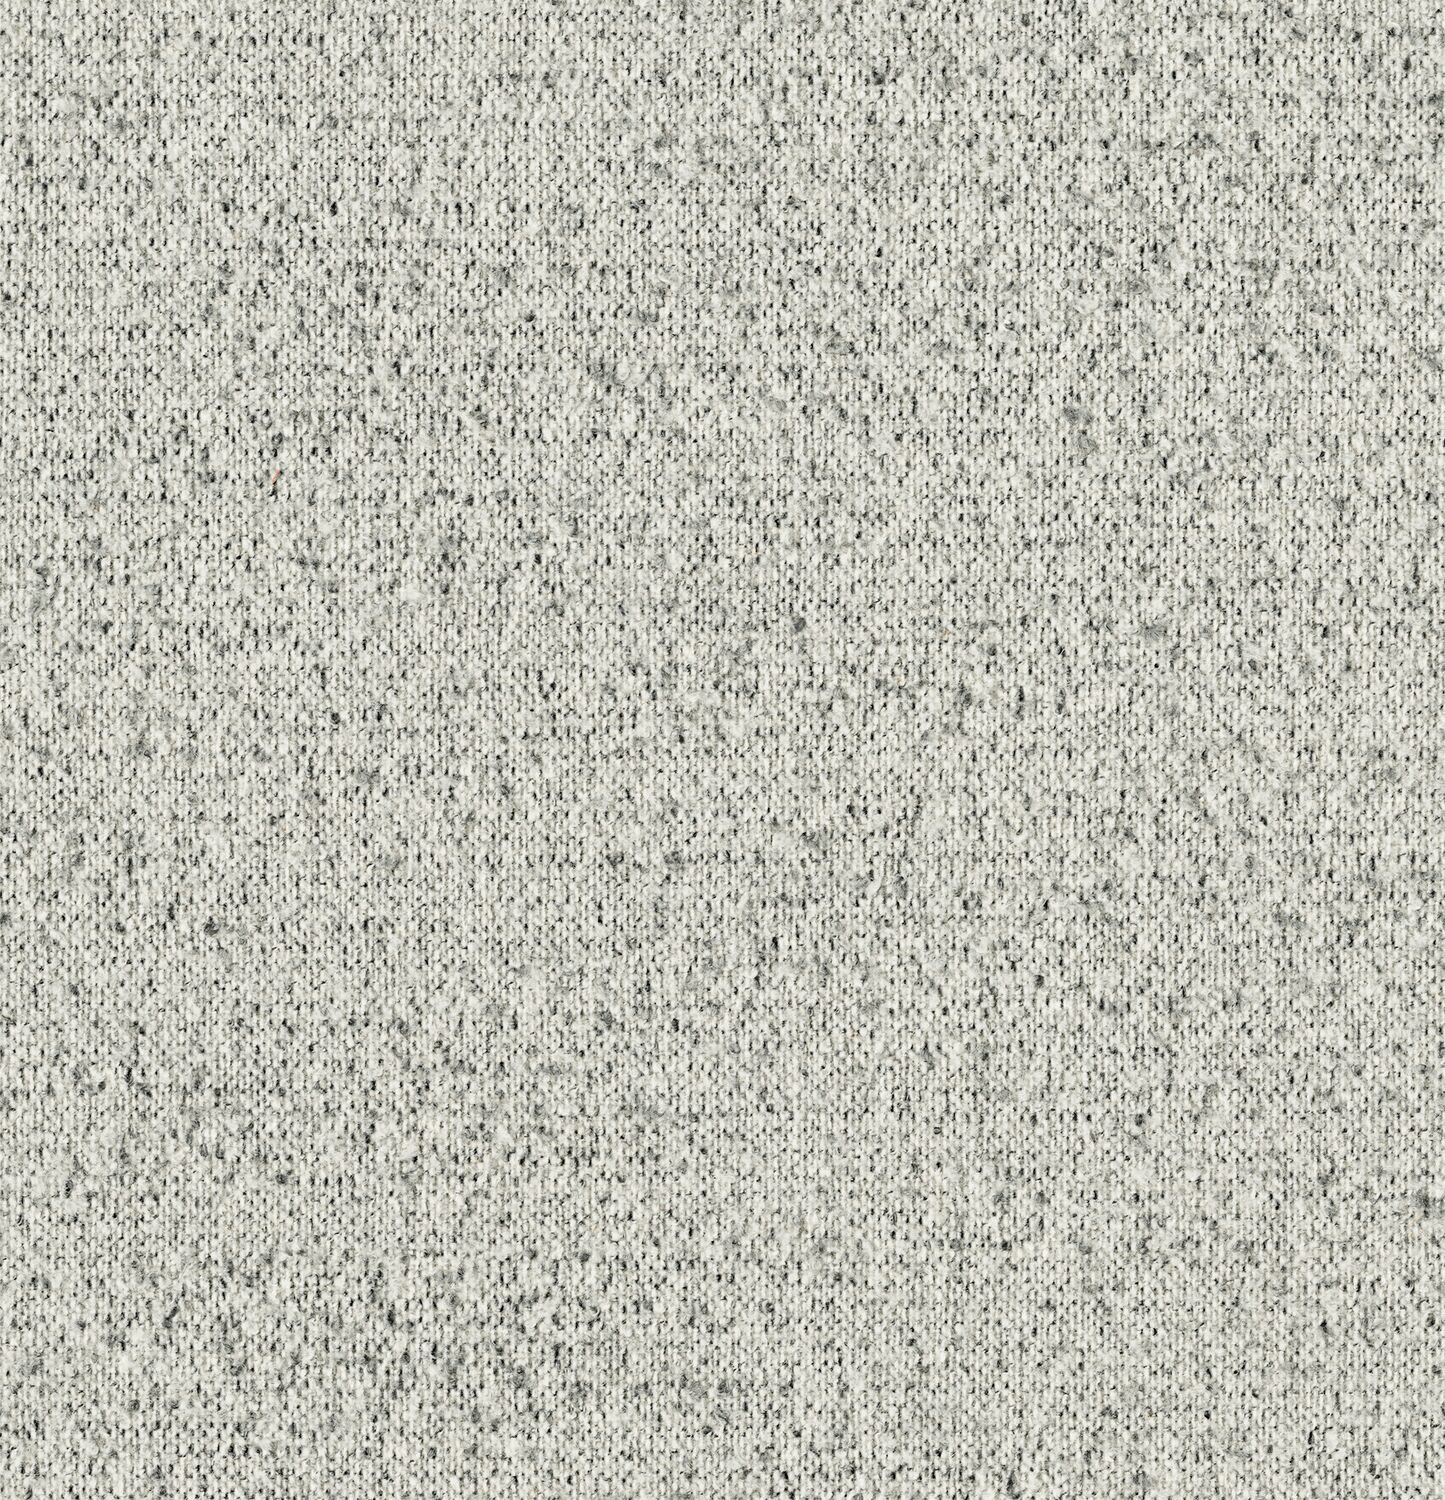 Everyday Boucle - Artemisia - 4111 - 05 Tileable Swatches